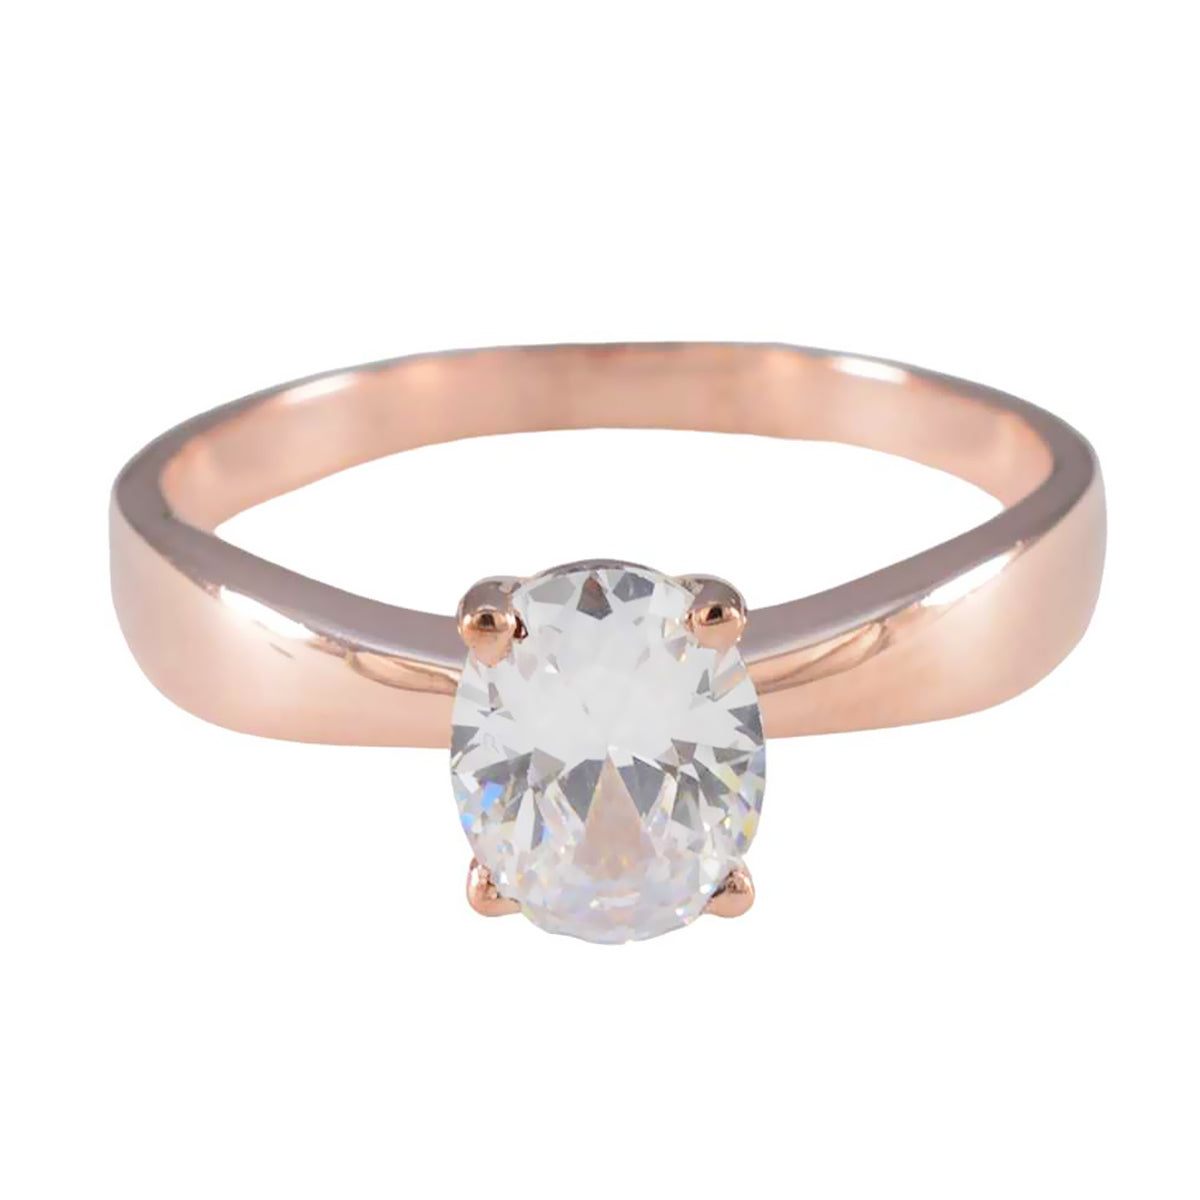 Riyo Excellent Silver Ring With Rose Gold Plating White CZ Stone Oval Shape Prong Setting  Jewelry Wedding Ring